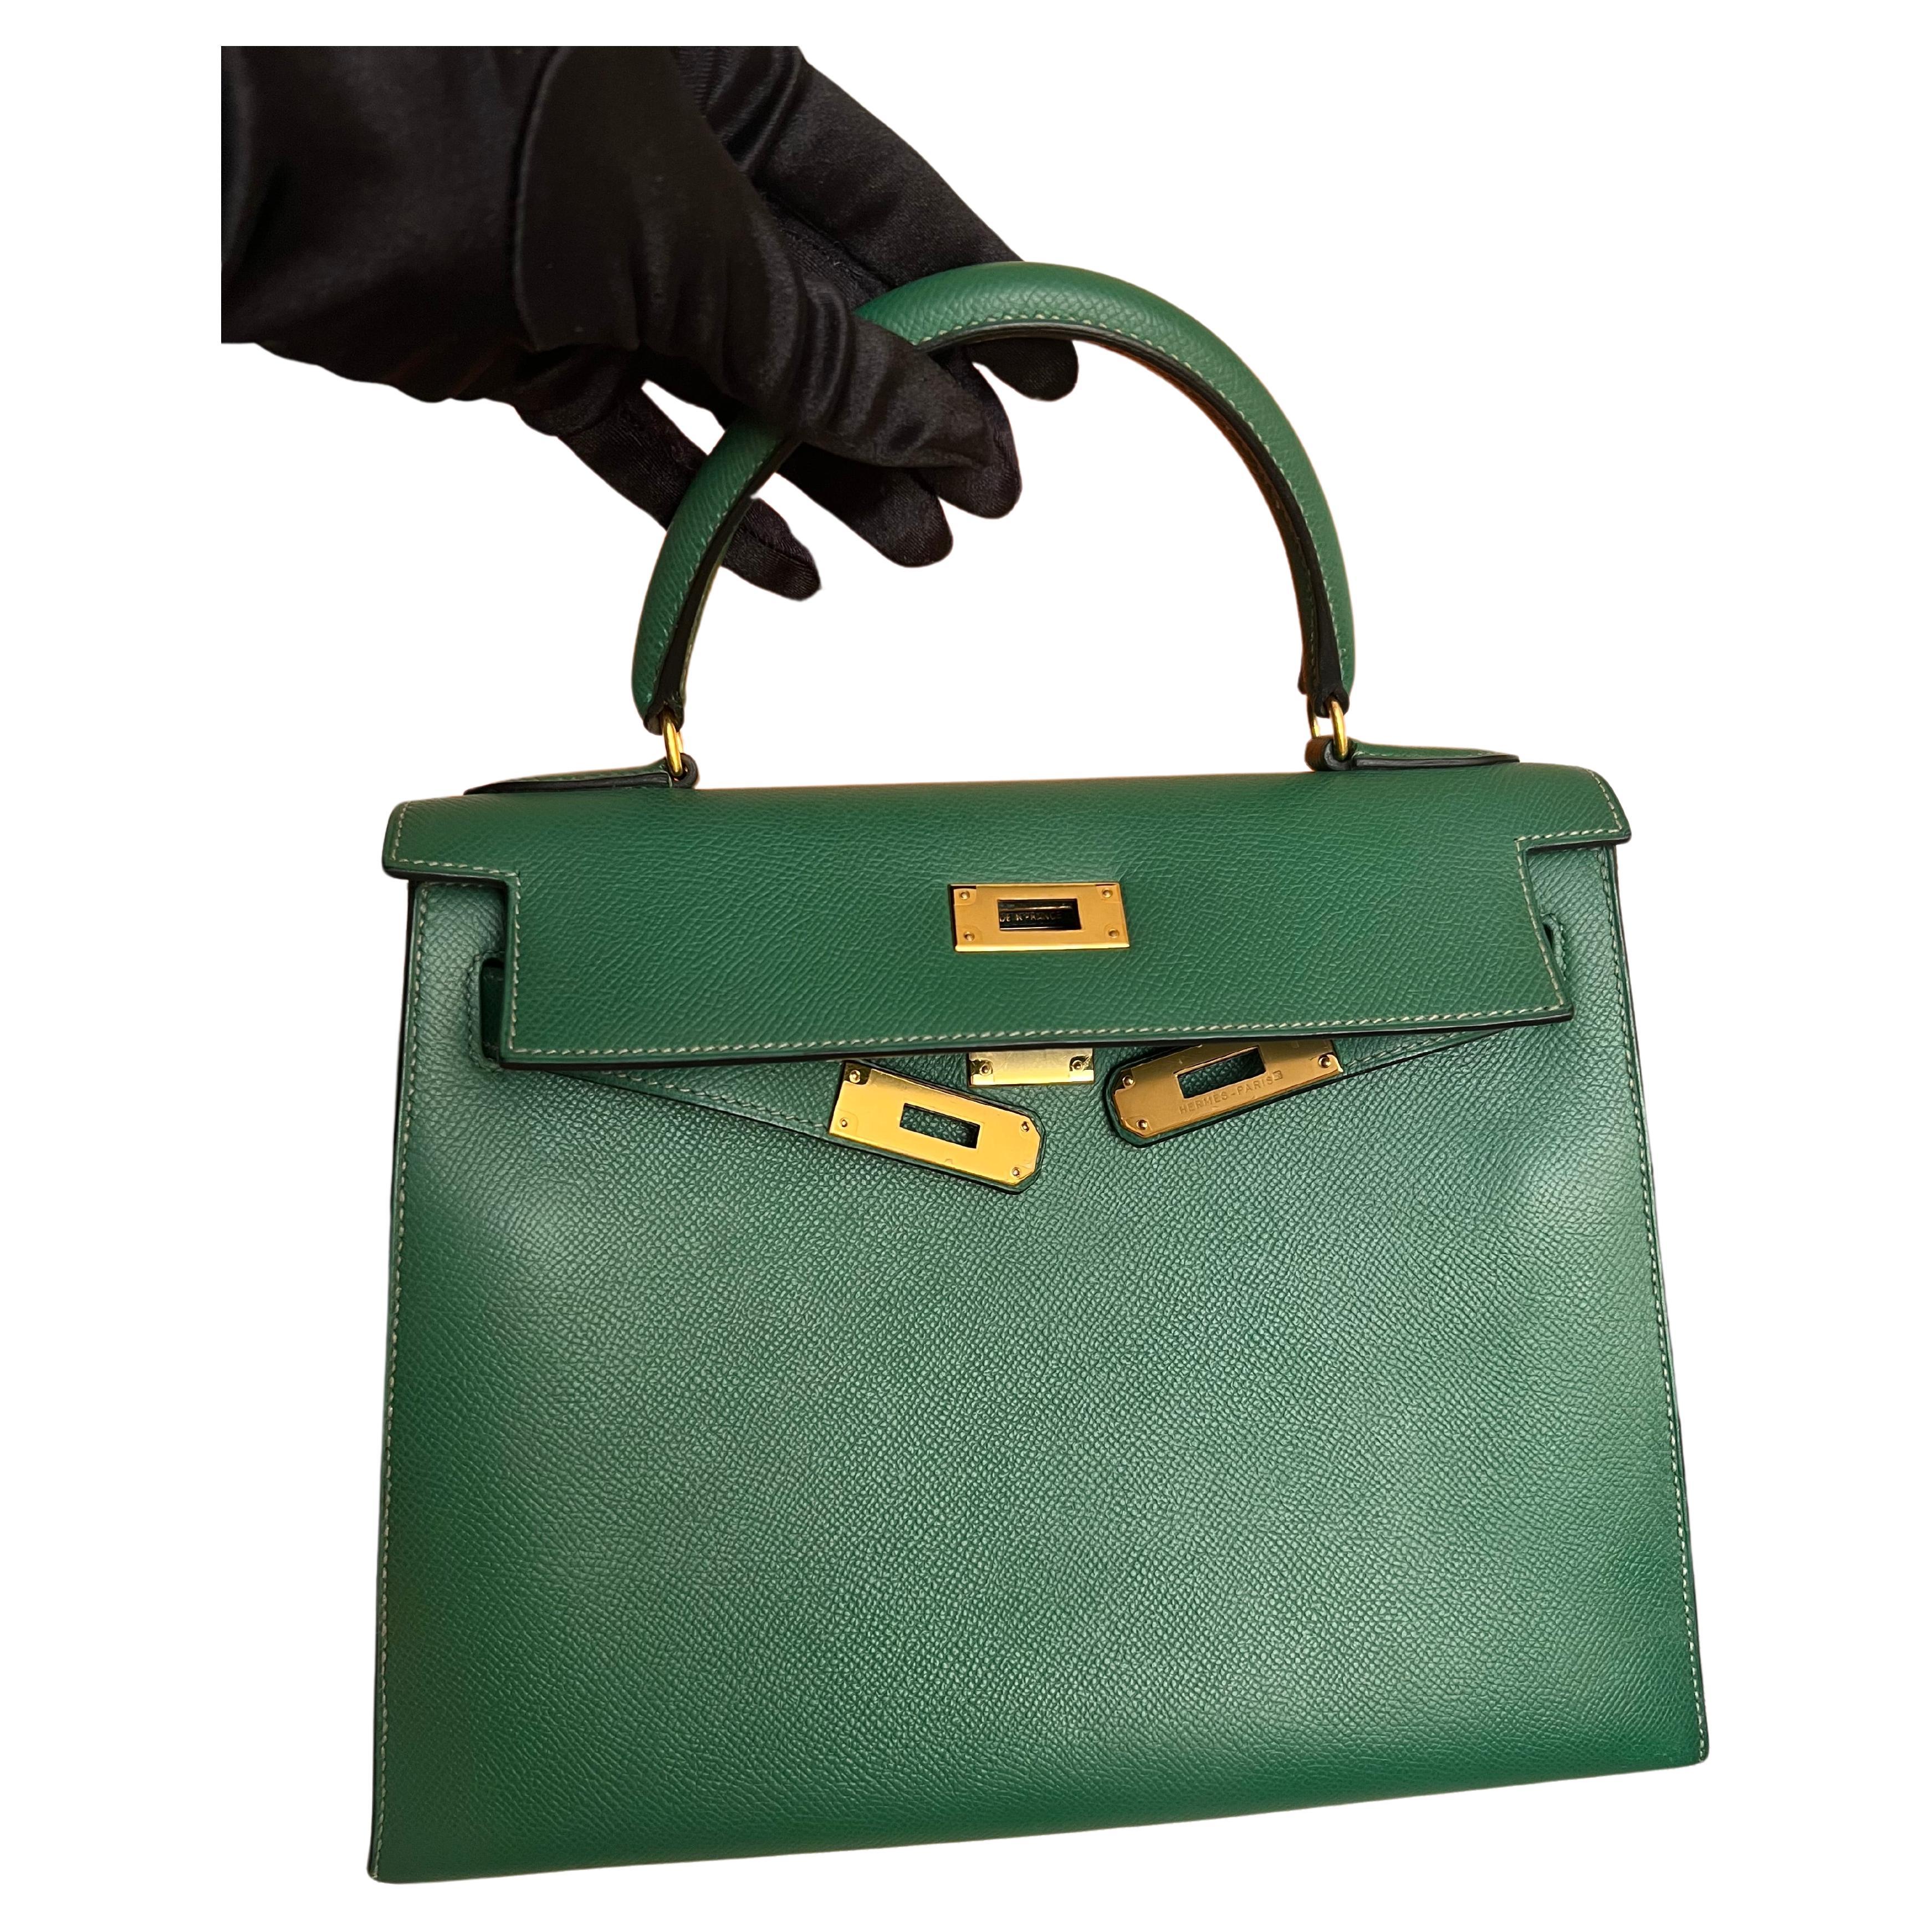 Hermes Kelly 28 Cactus Sellier Bag with GHW in Epsom leather  For Sale